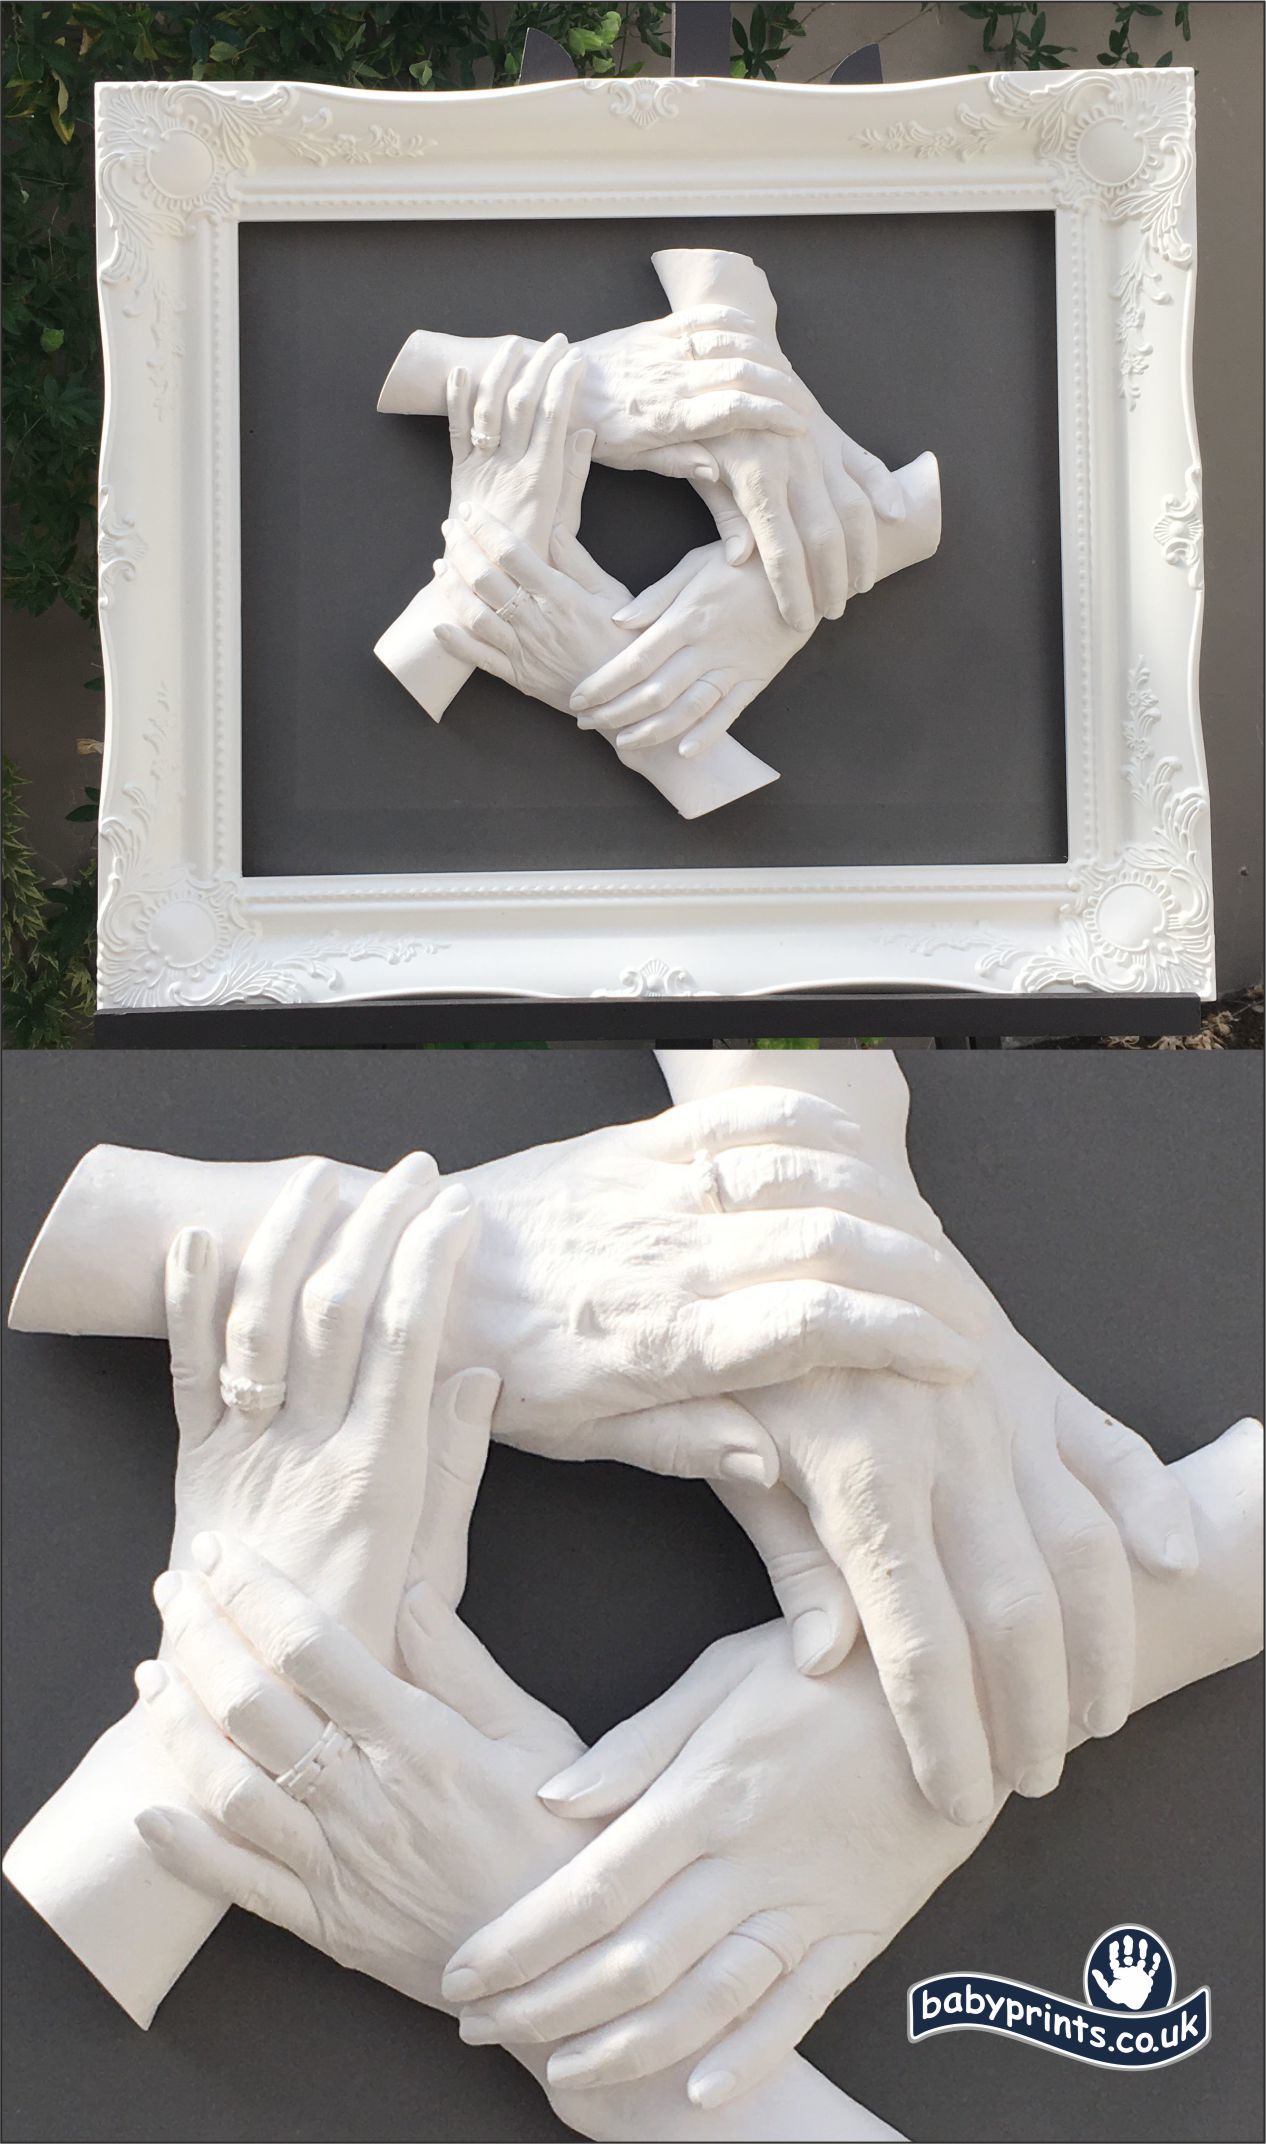 Family of 5 linked hands statue